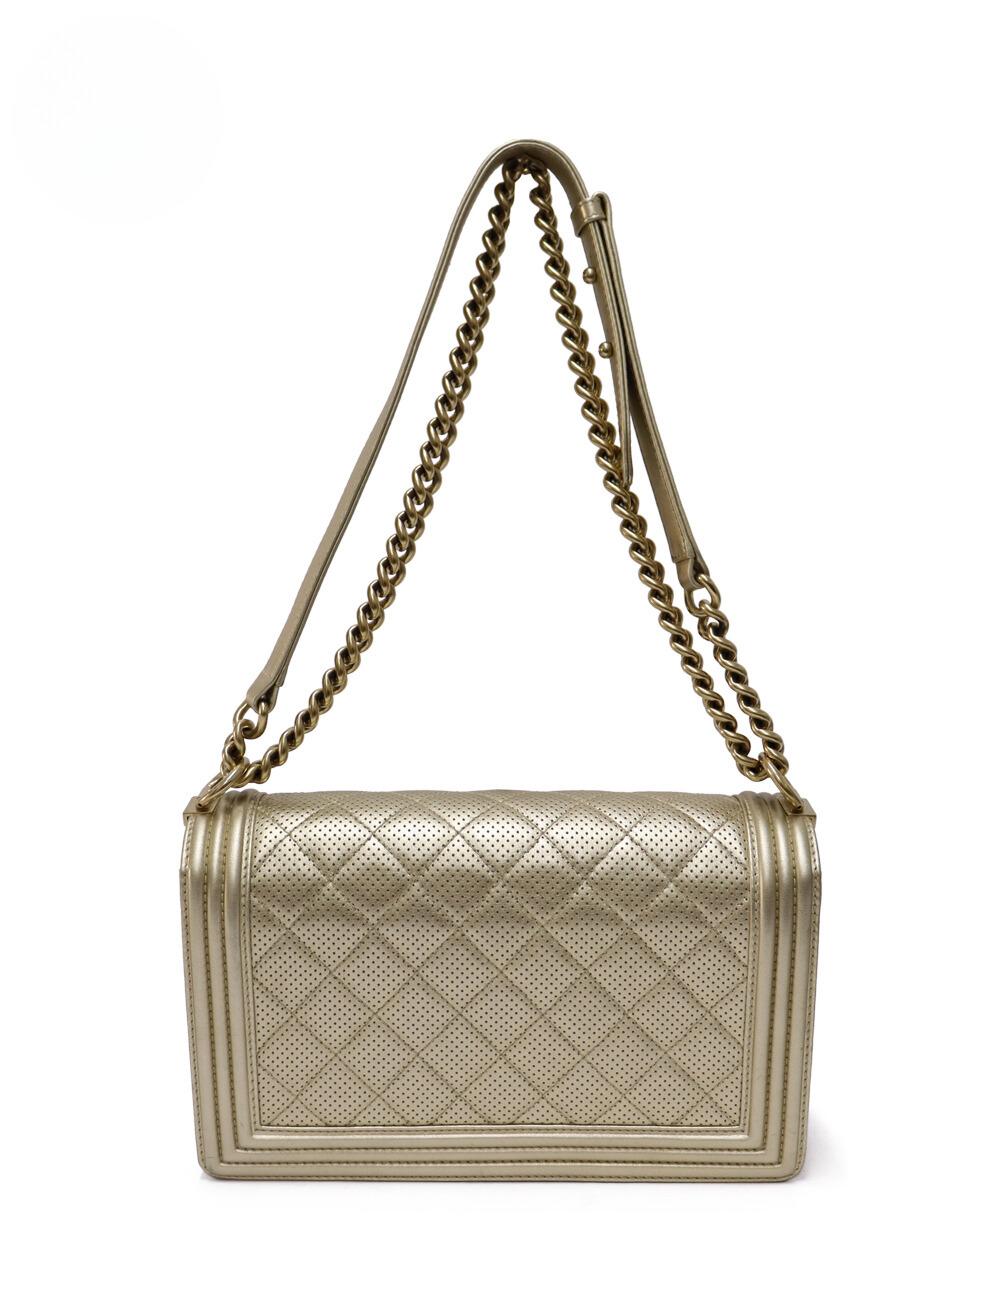 Chanel Light Gold Perforated Leather New Medium Boy Bag 5